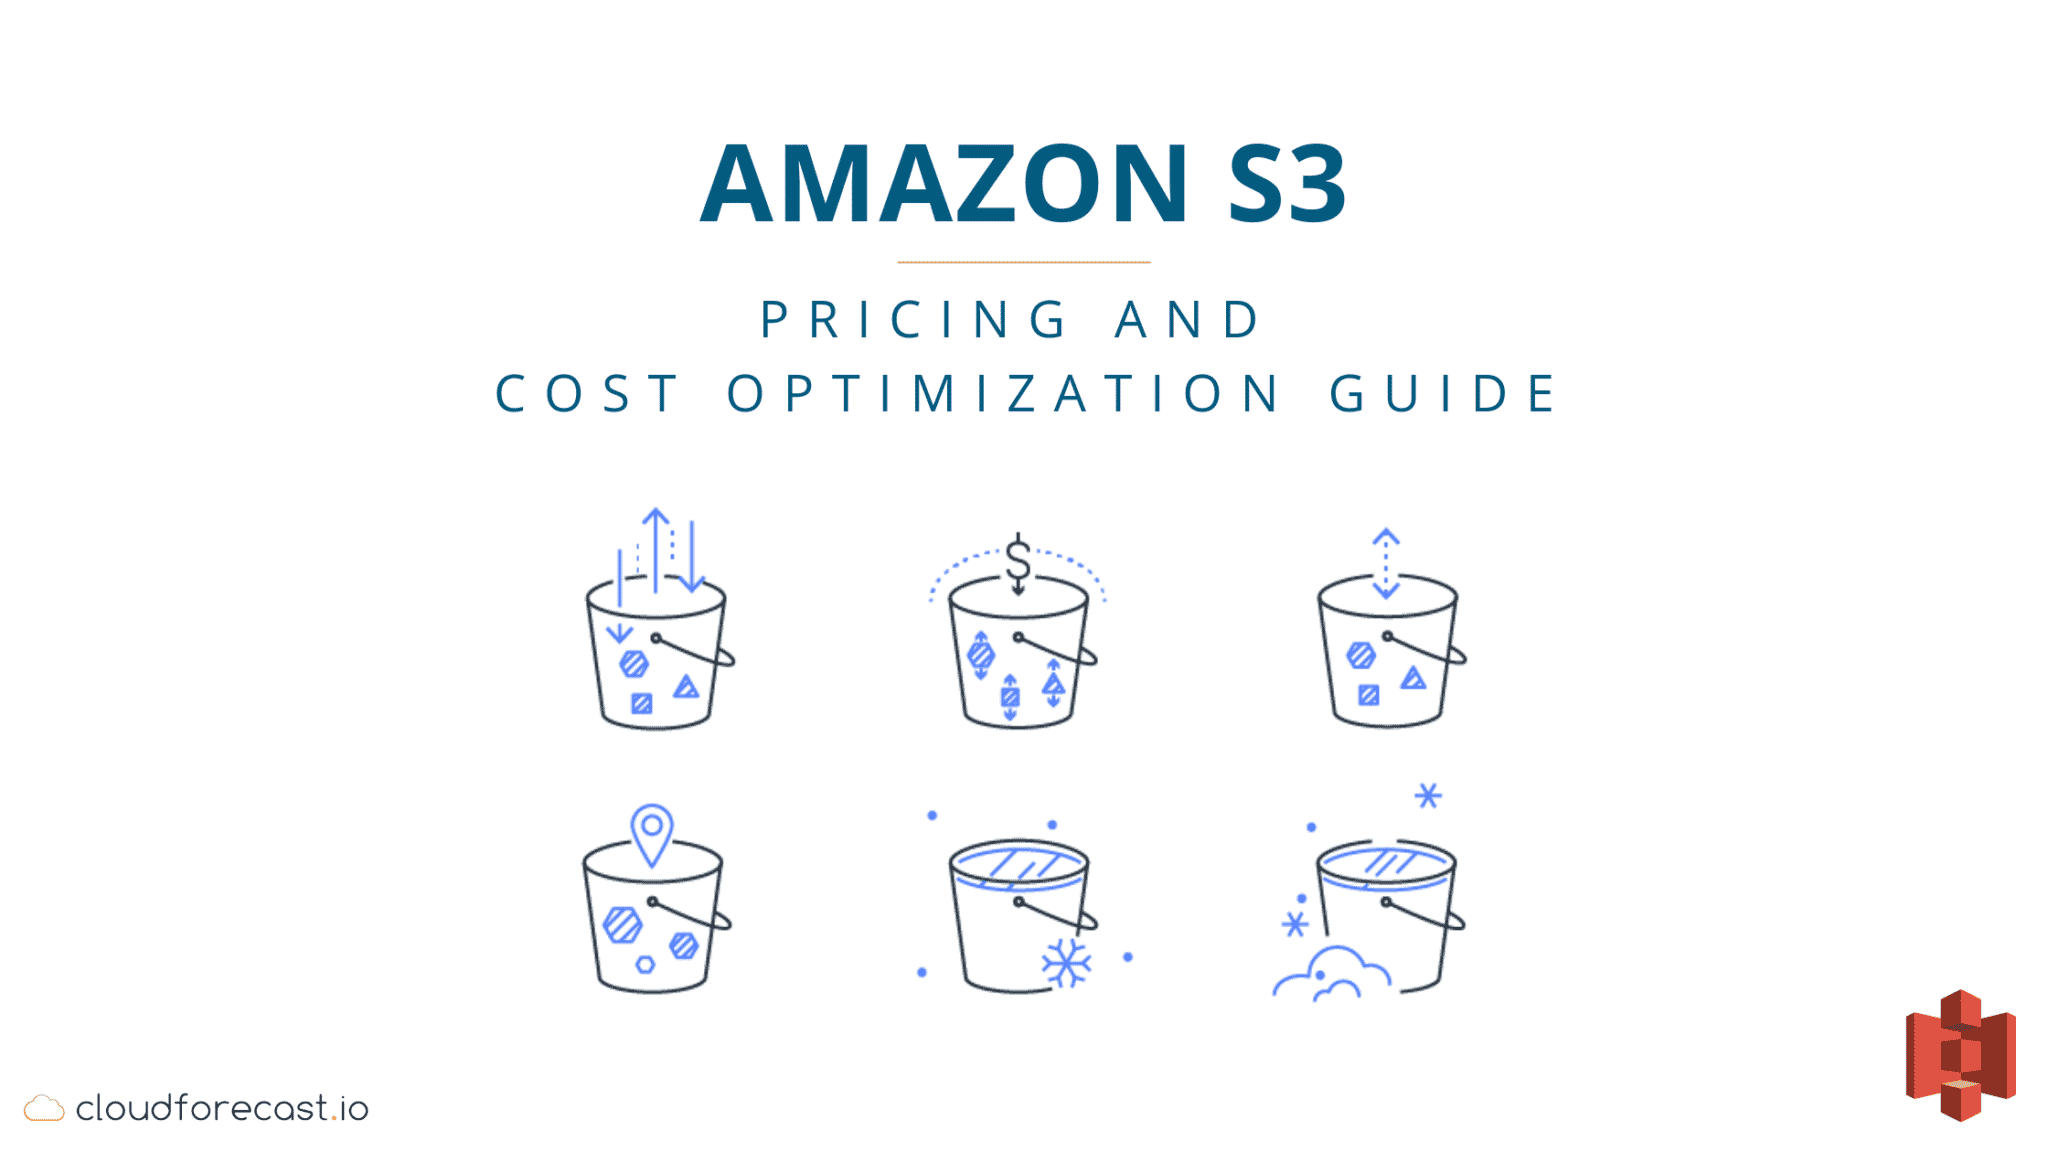 Amazon S3 Pricing and Cost Optimization Guide